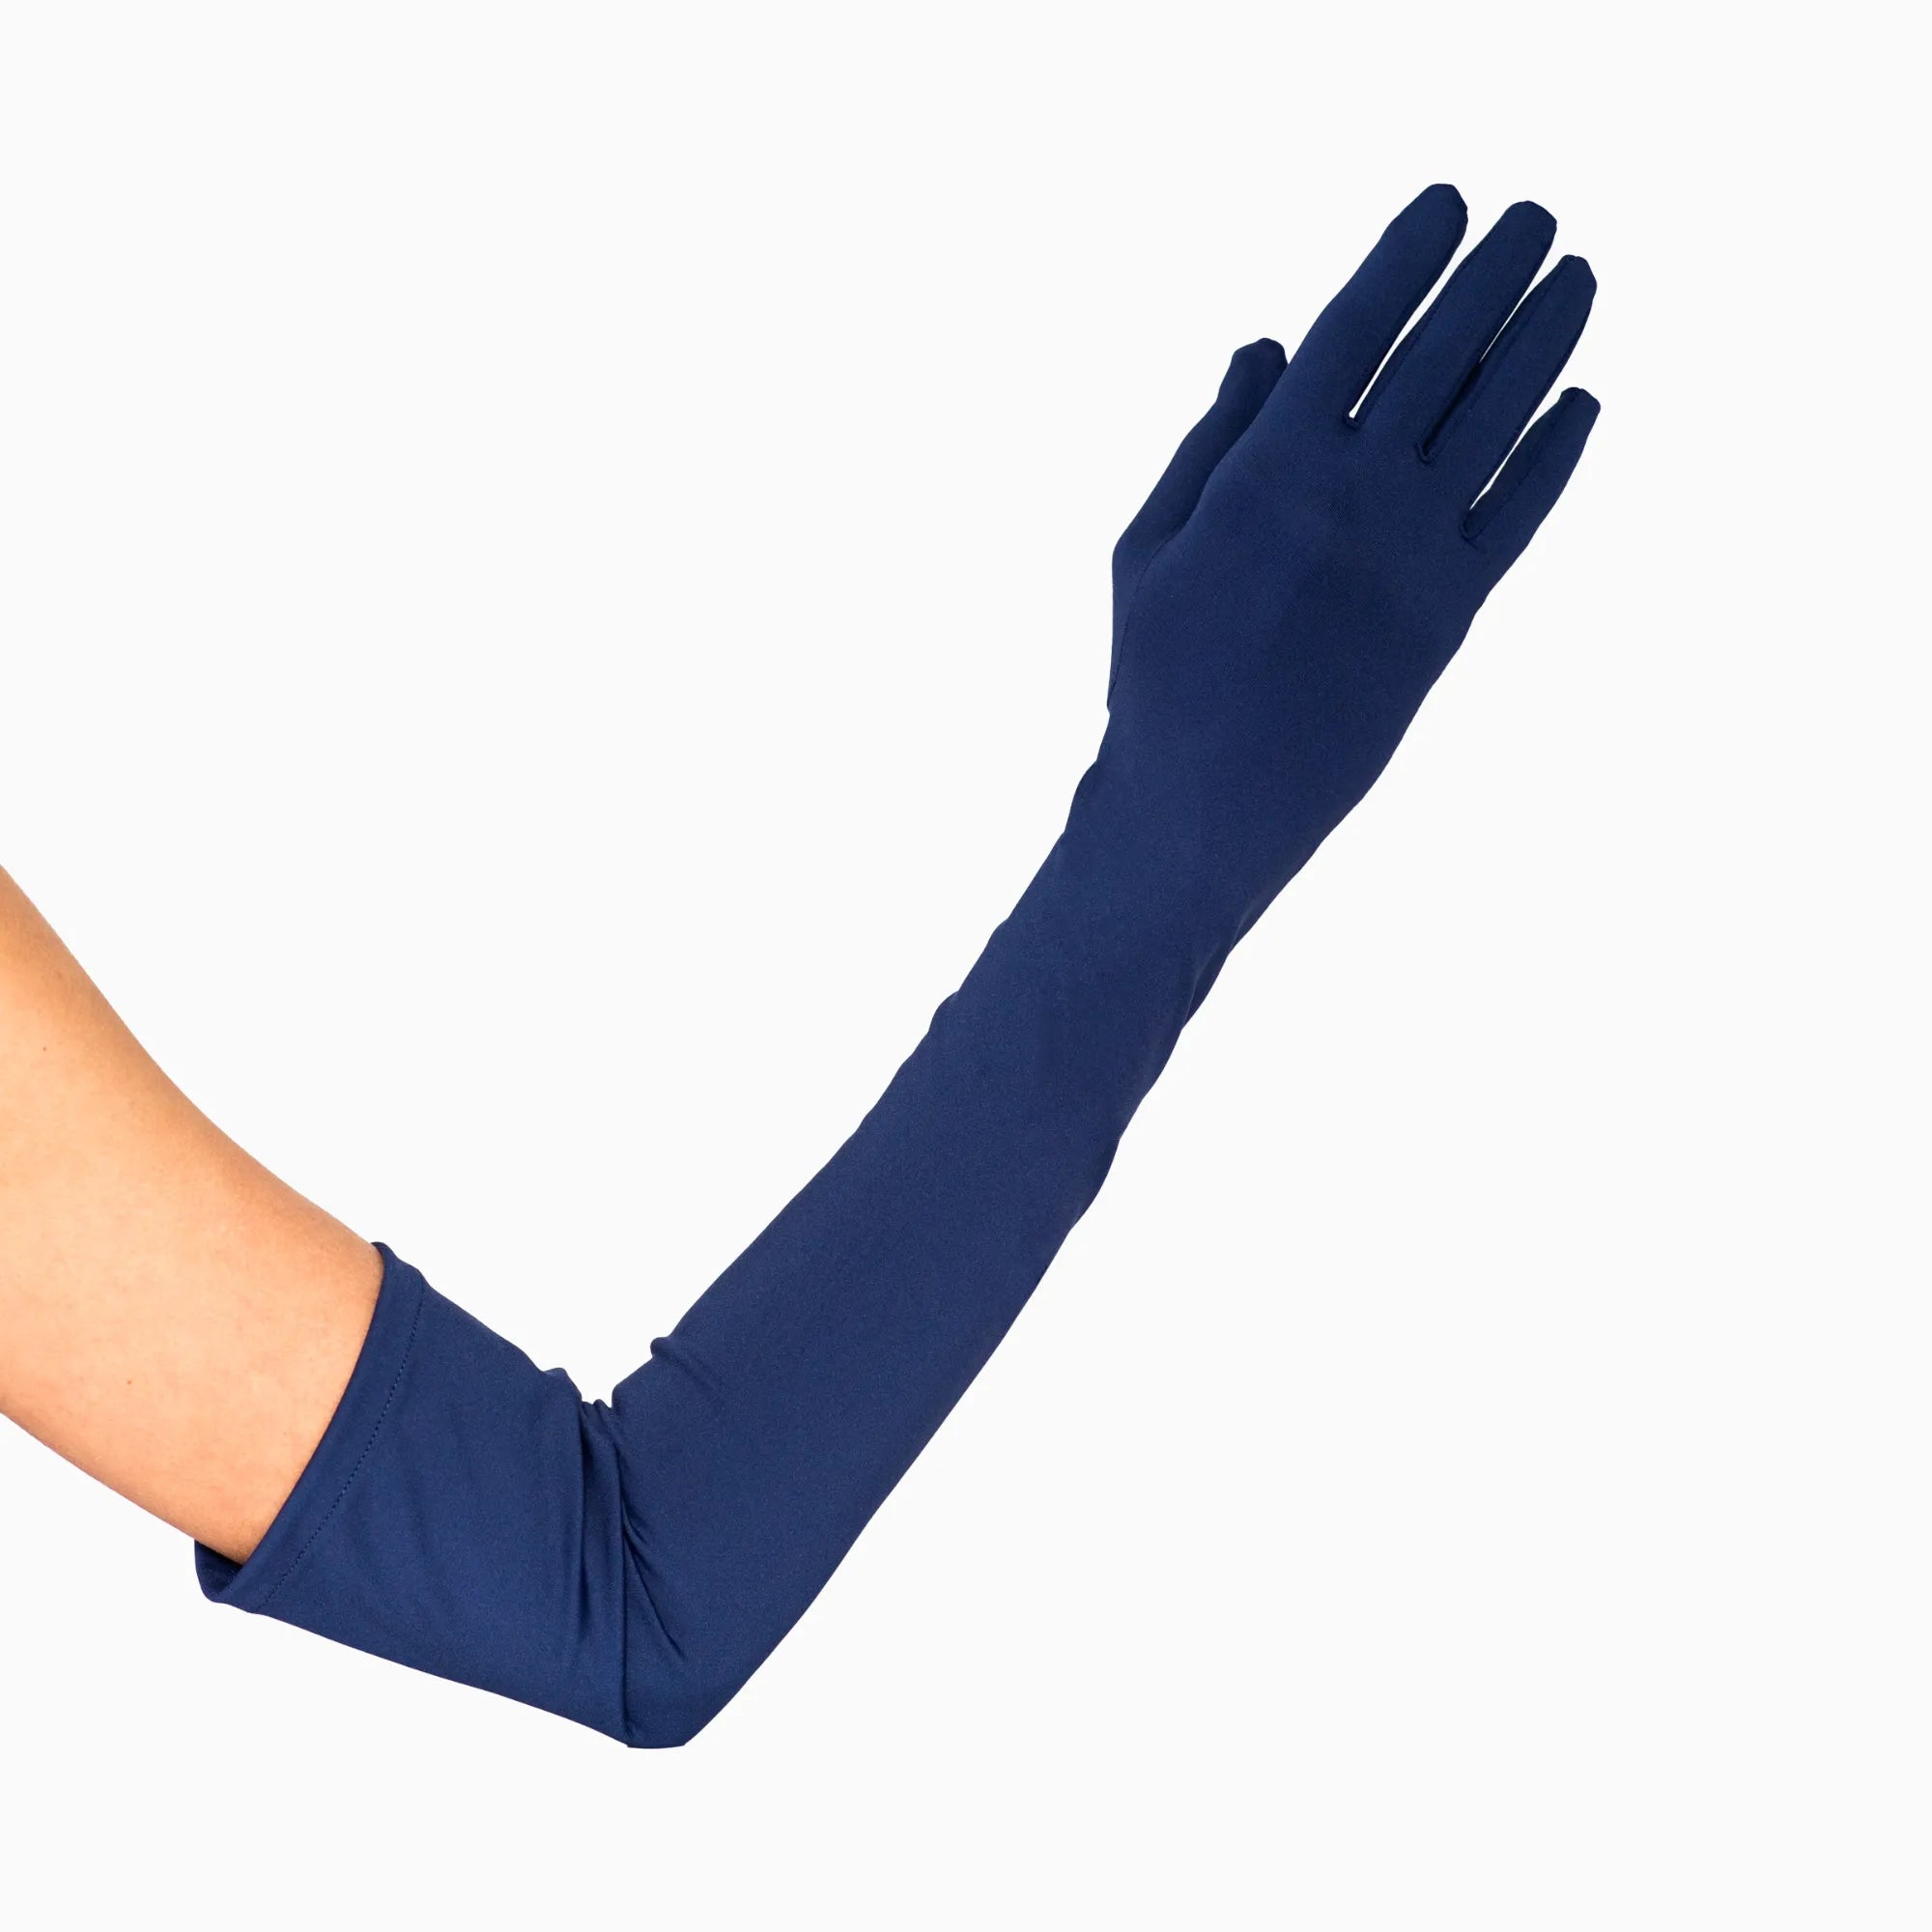 Hand wearing over the elbow blue opera womens glove.